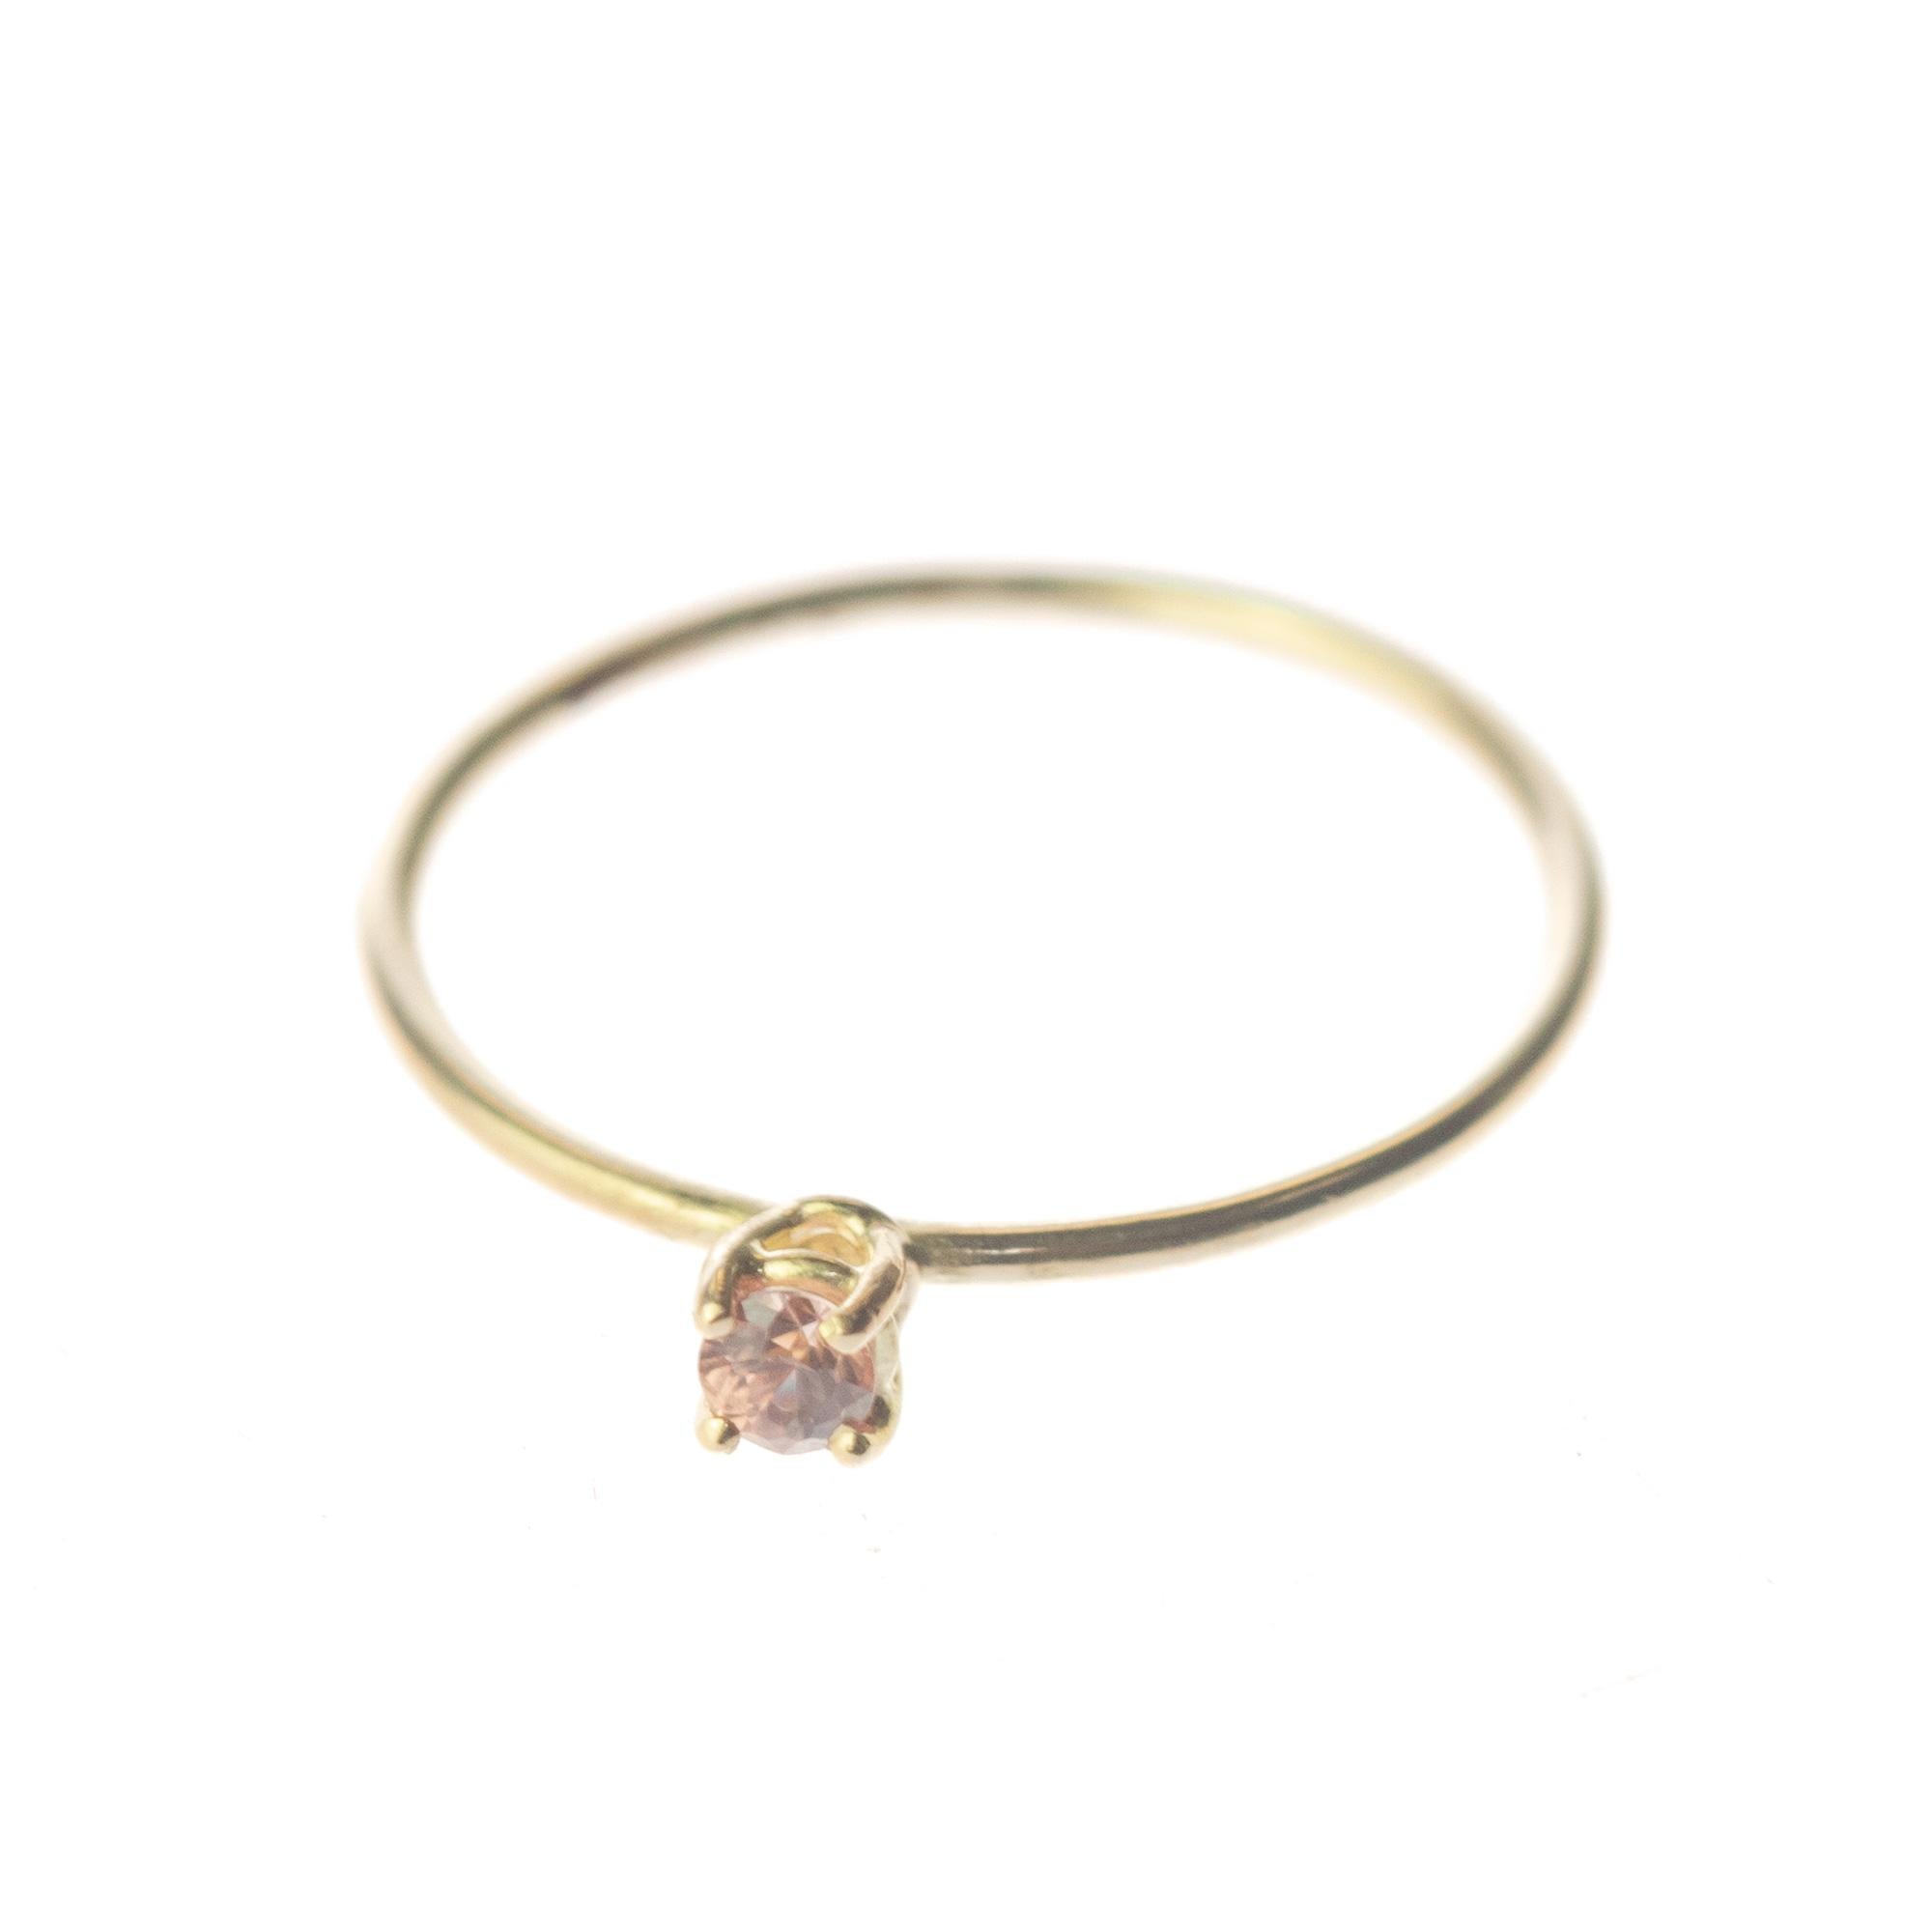 Signature INTINI Jewels pink sapphire jewellery. Modern and elegant ring design in 9k yellow gold with an brilliant cut with tiny griffes sormounting the ring.

Pink sapphires are recognized as having a variety of meanings, symbolizing good fortune,